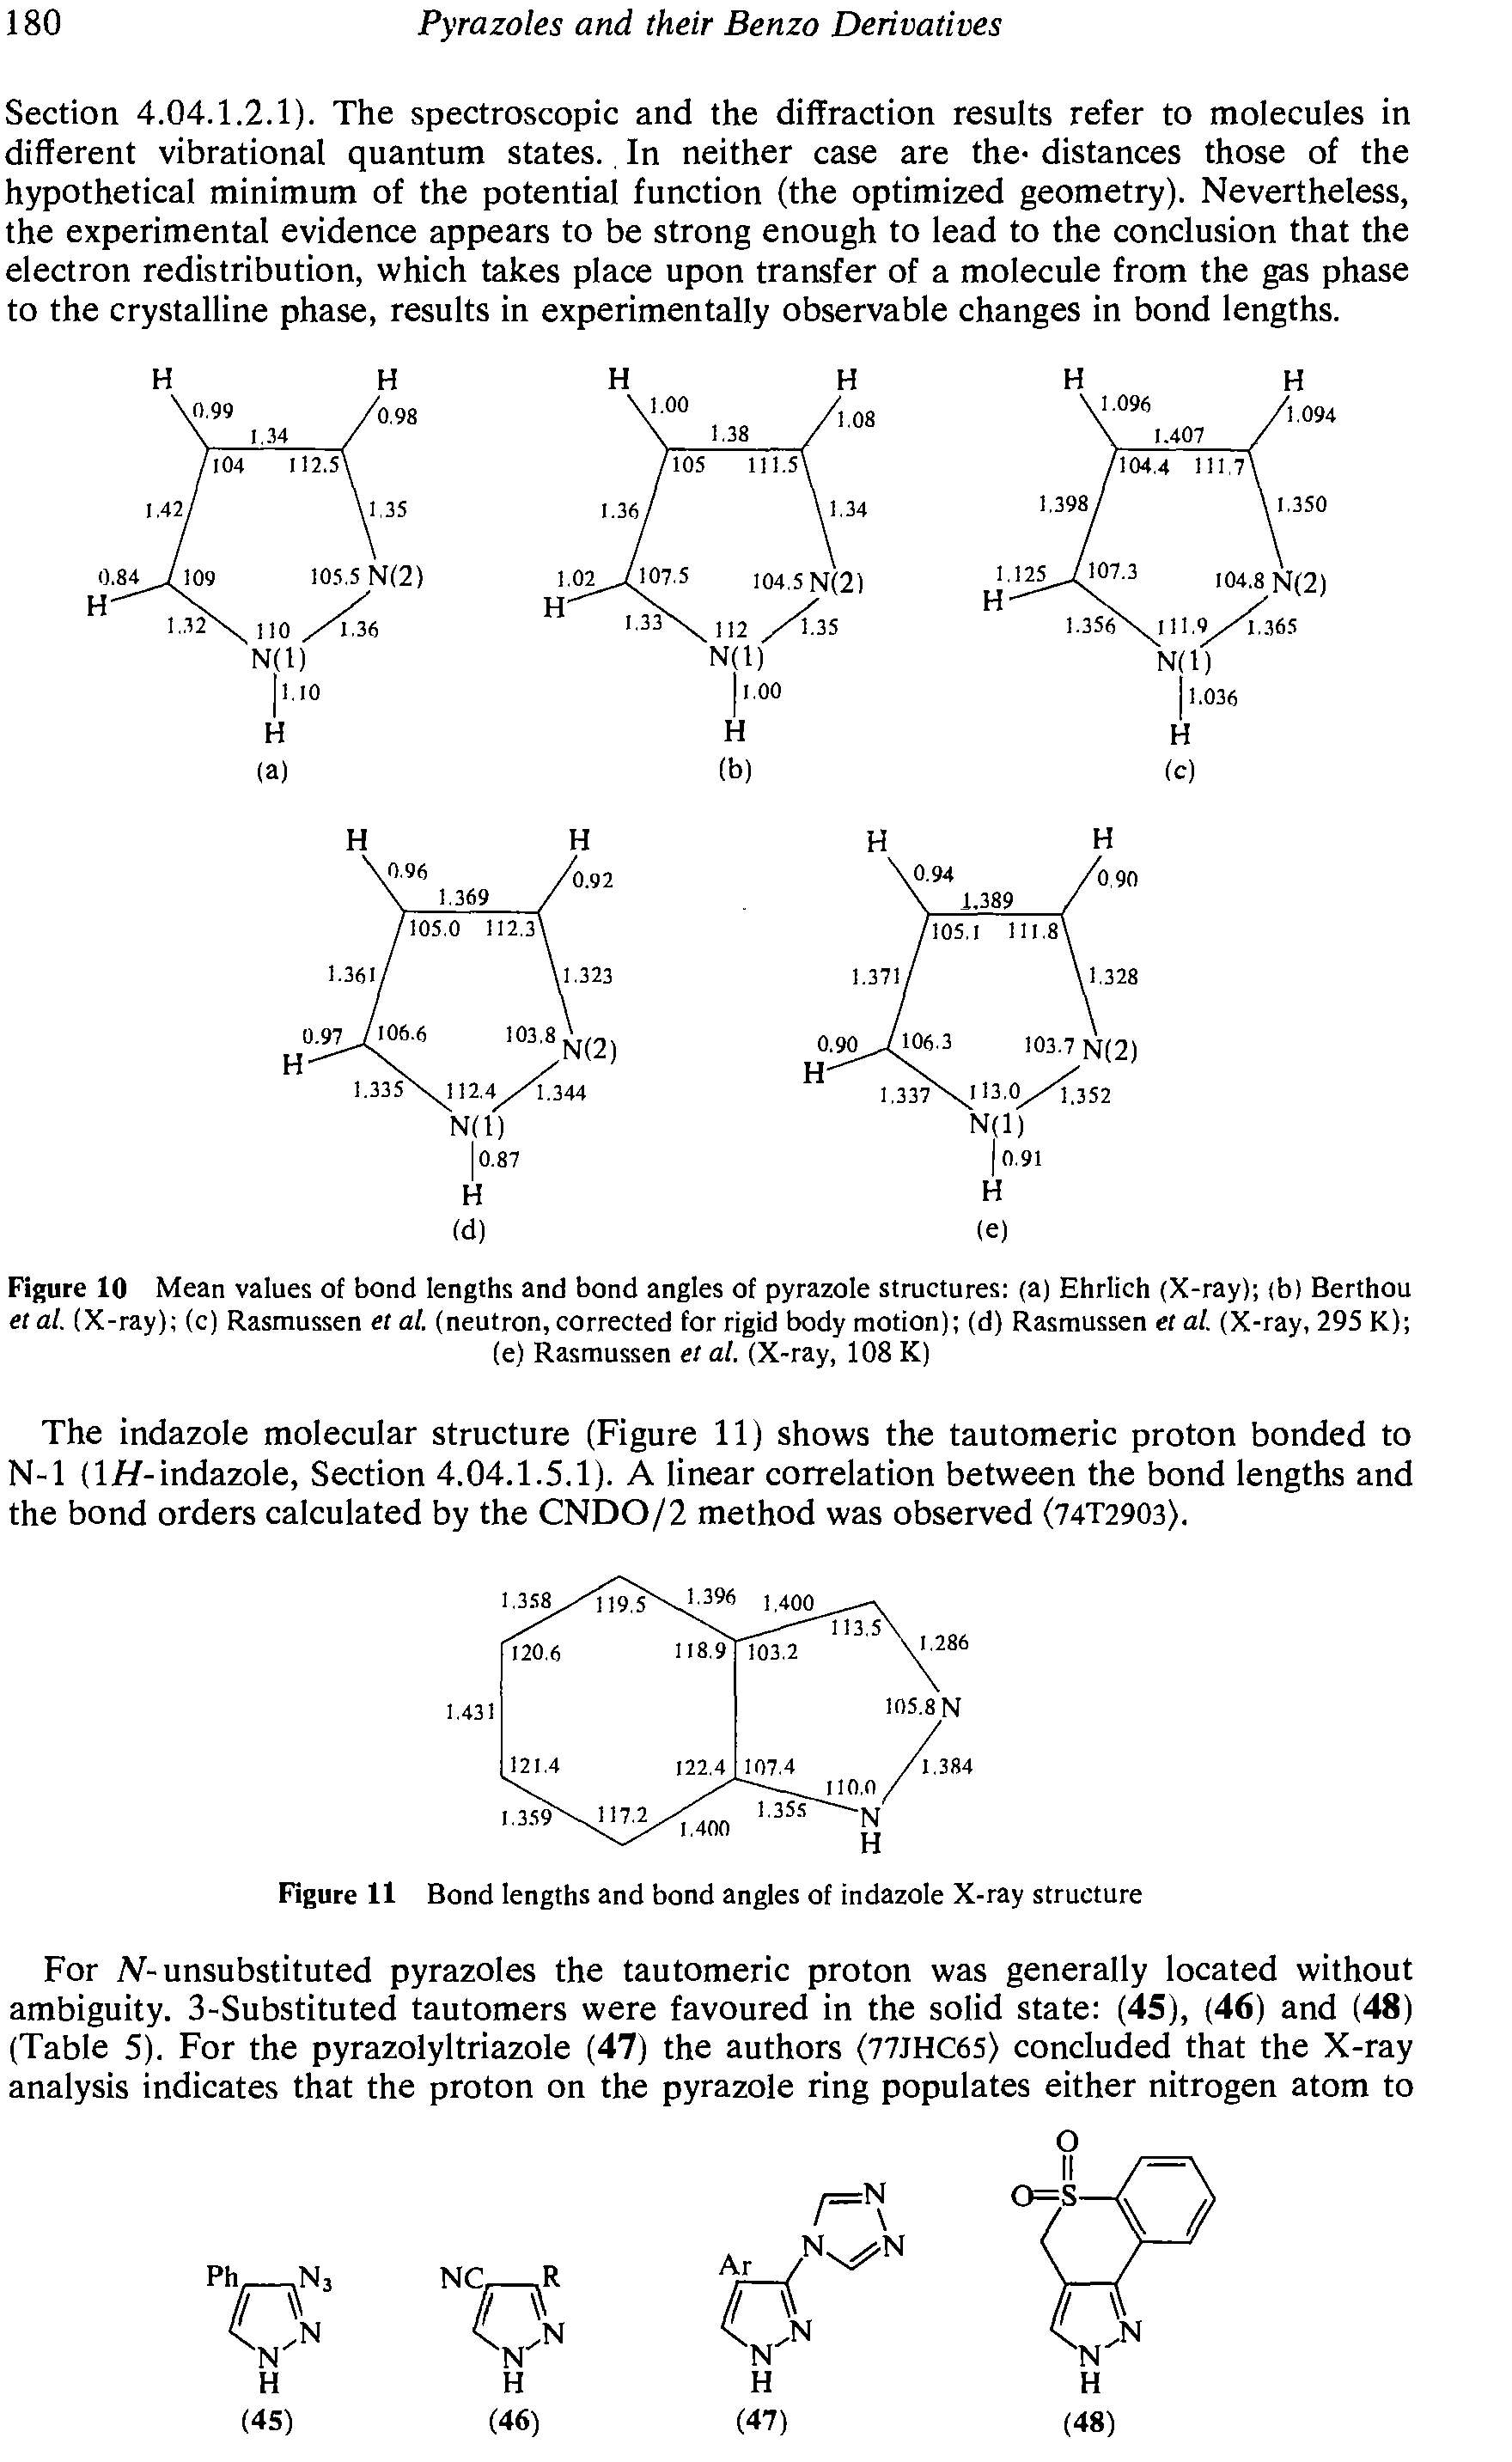 Figure 11 Bond lengths and bond angles of indazole X-ray structure...